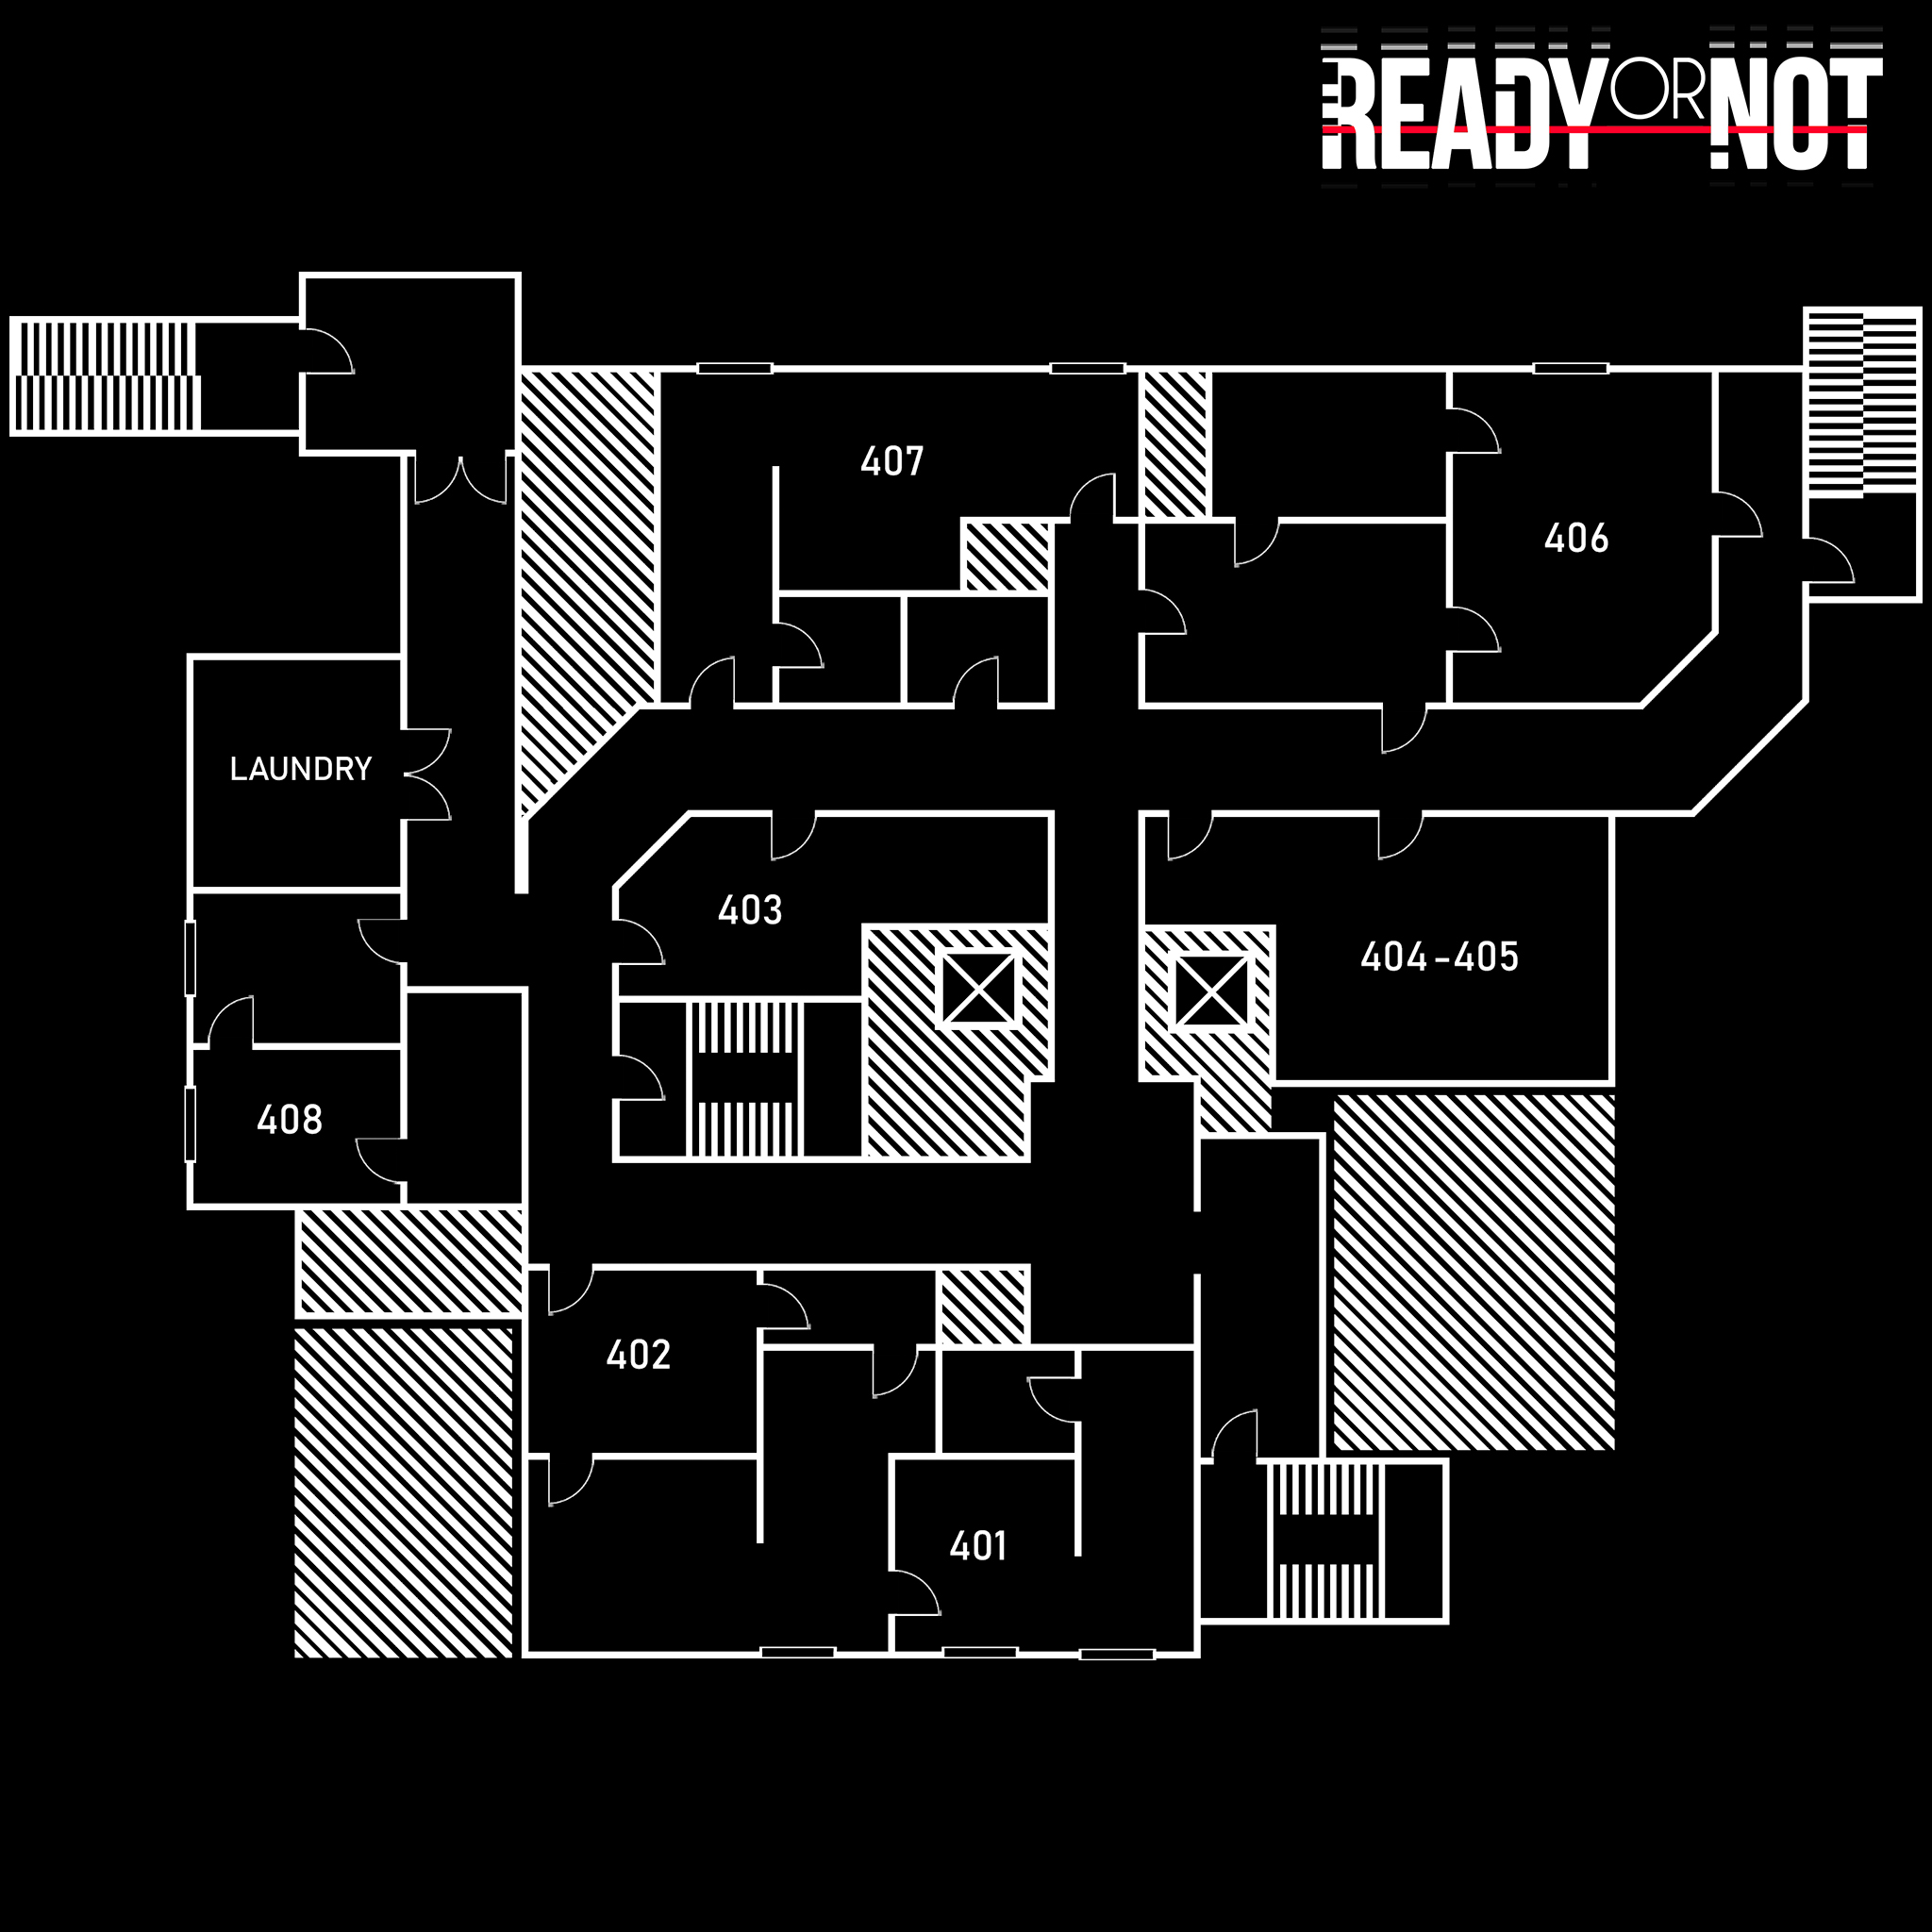 Read Or Not | Map Blueprints image 15